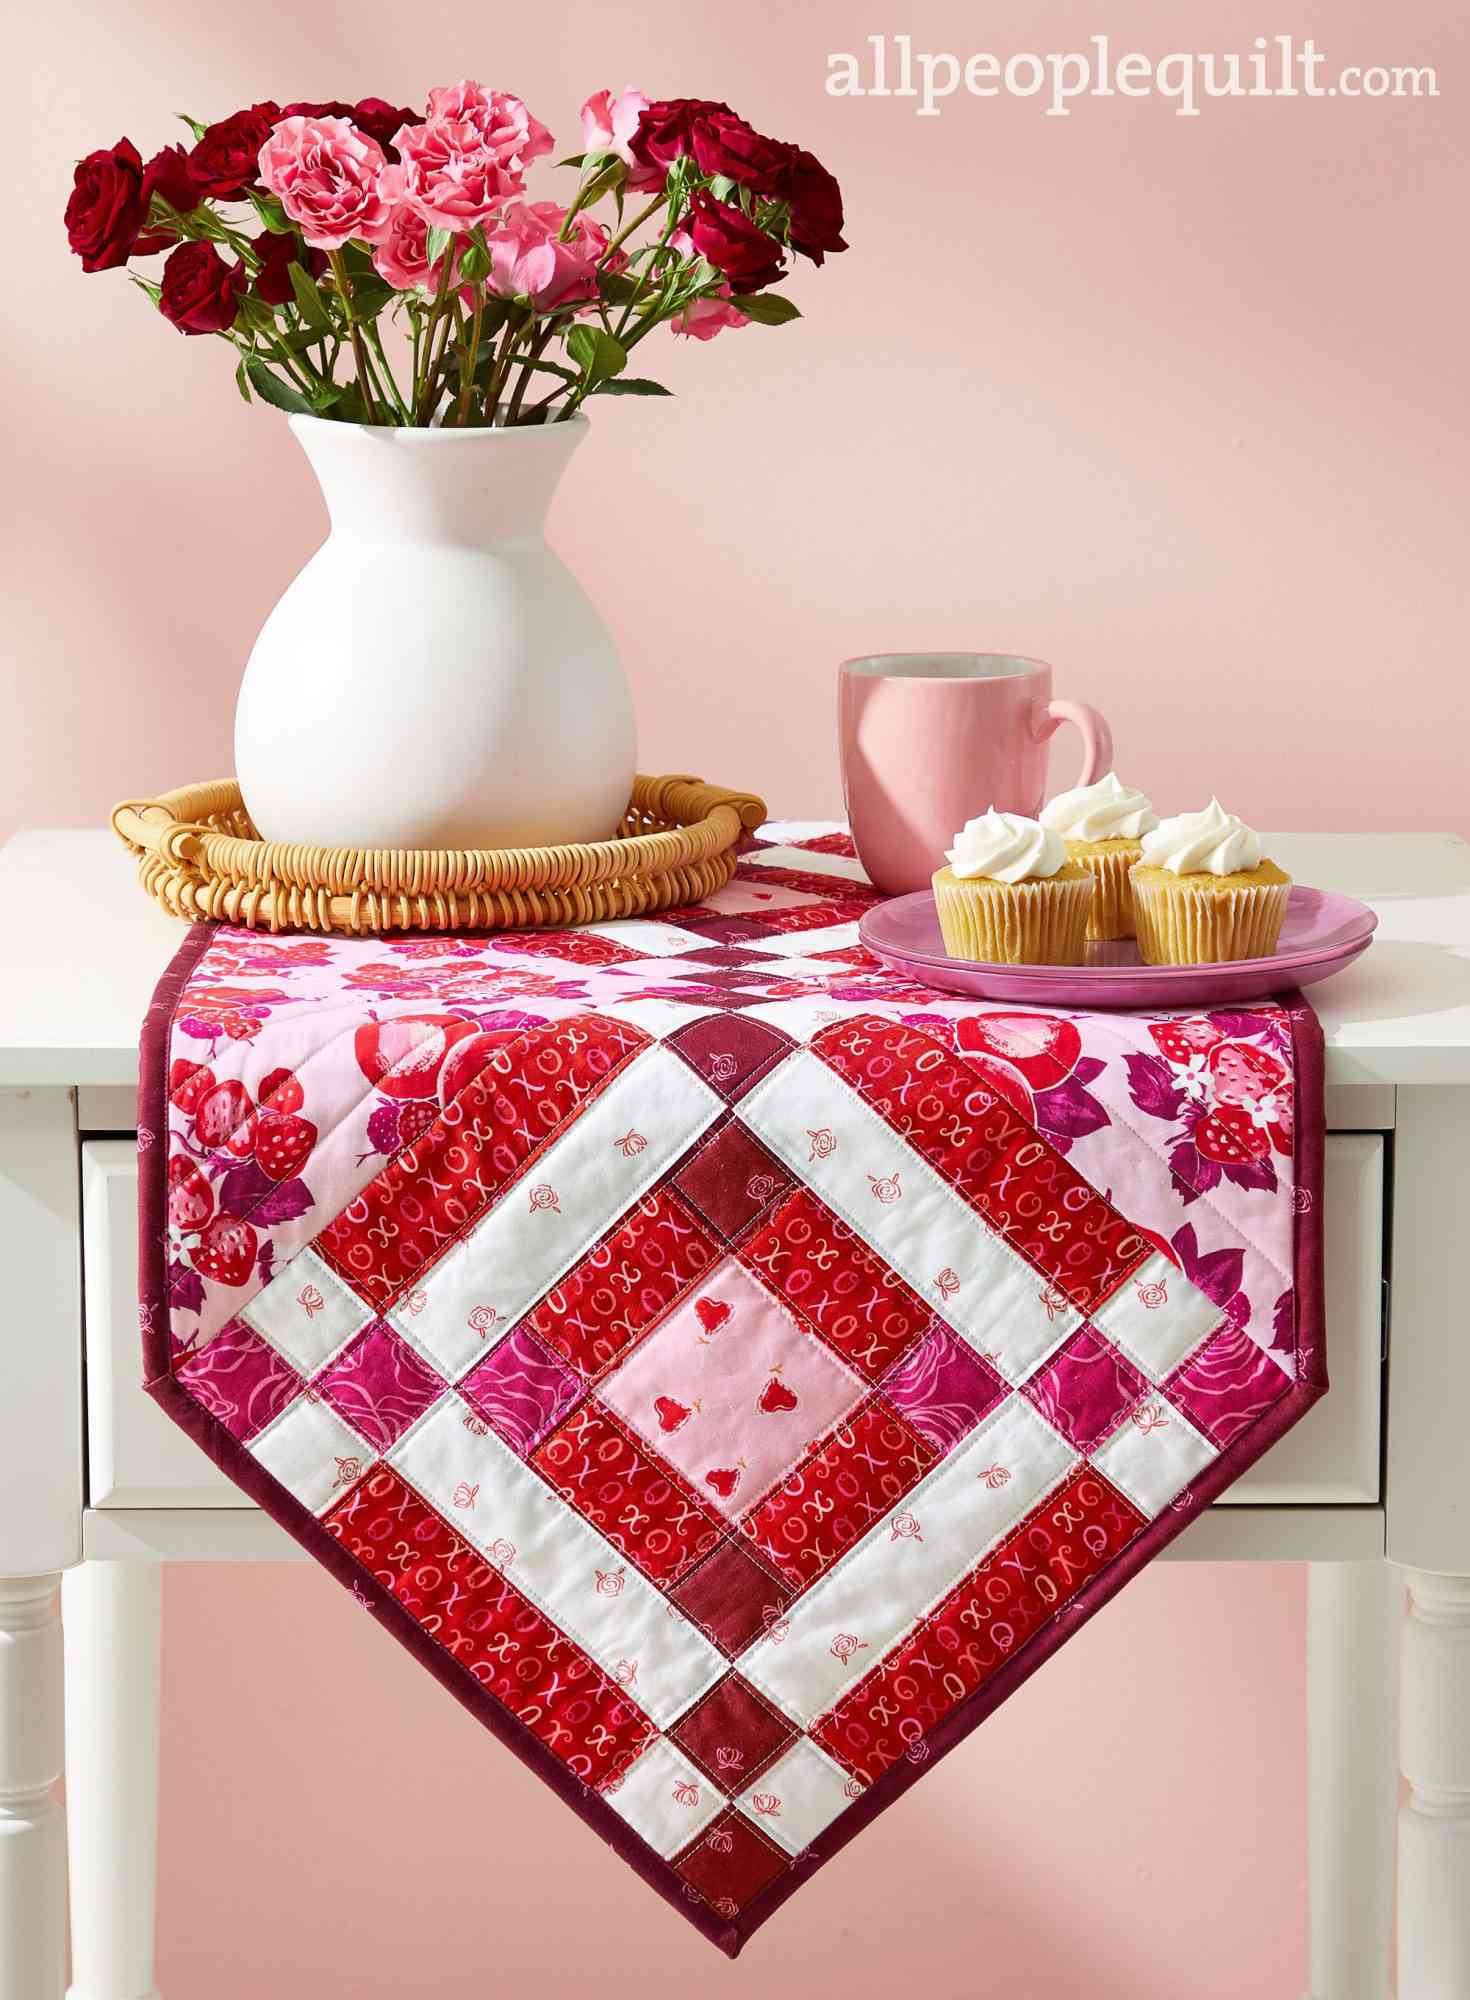 Heartfelt Valentine's Day Sewing Projects | AllPeopleQuilt.com